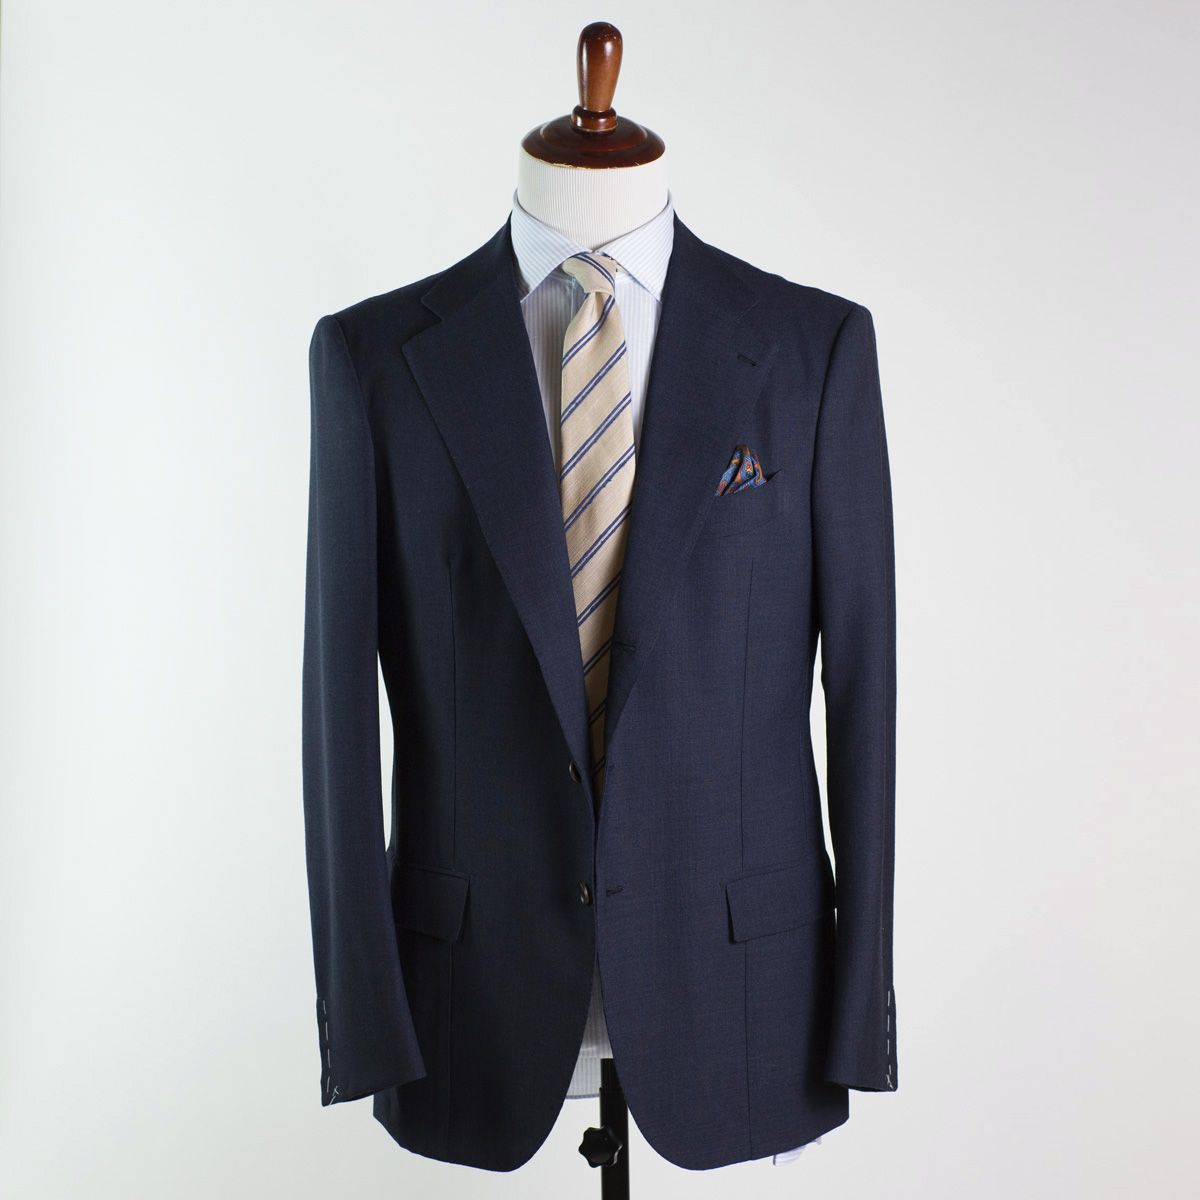 Tips for Buying A Wedding Suit – Put This On